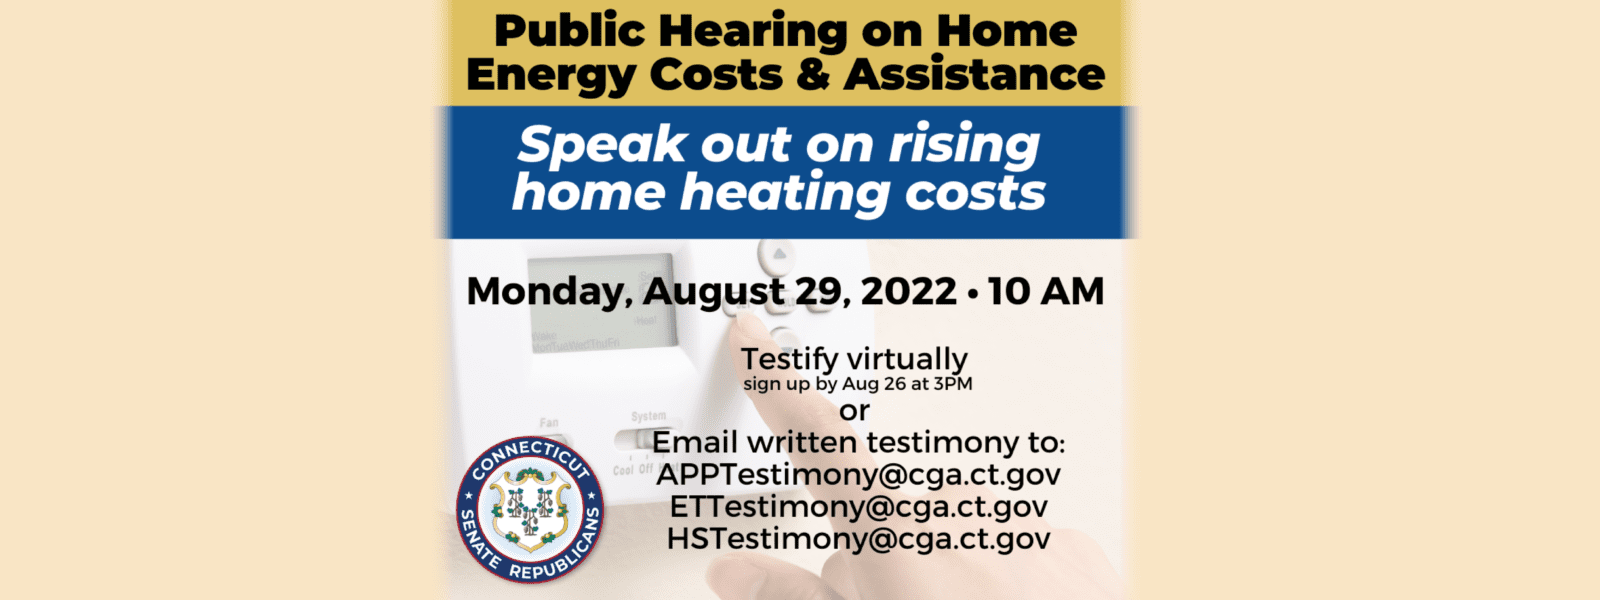 Worried about rising home energy costs? Speak out.